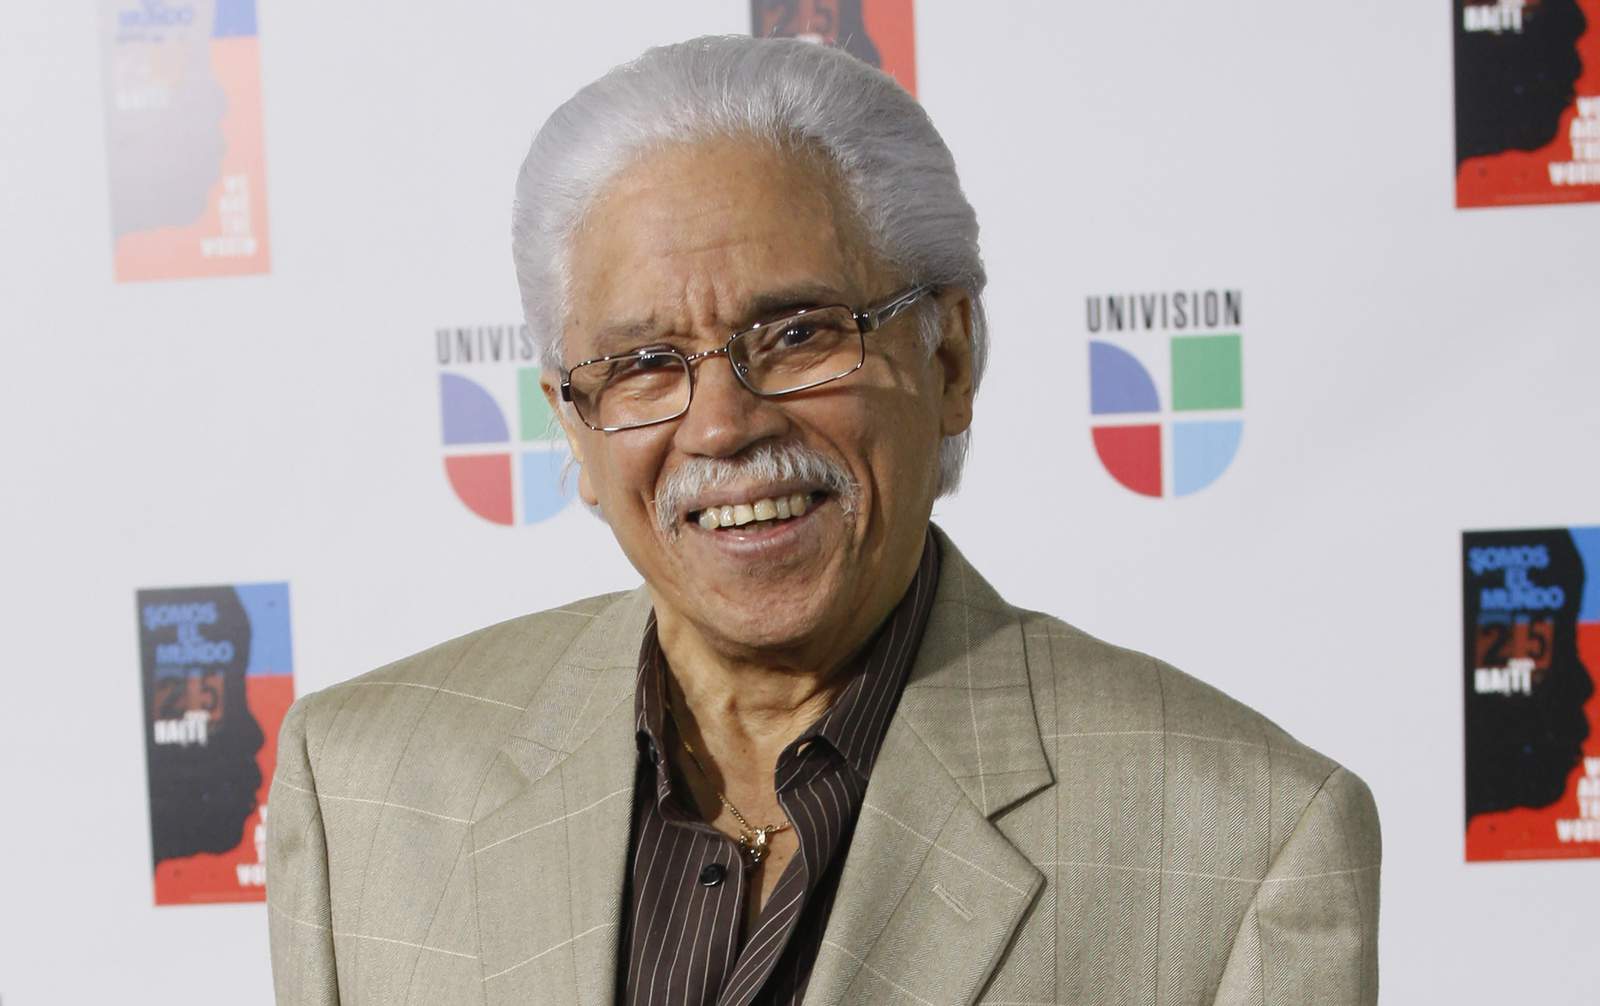 Johnny Pacheco, an idol in world of salsa, dies at age 85